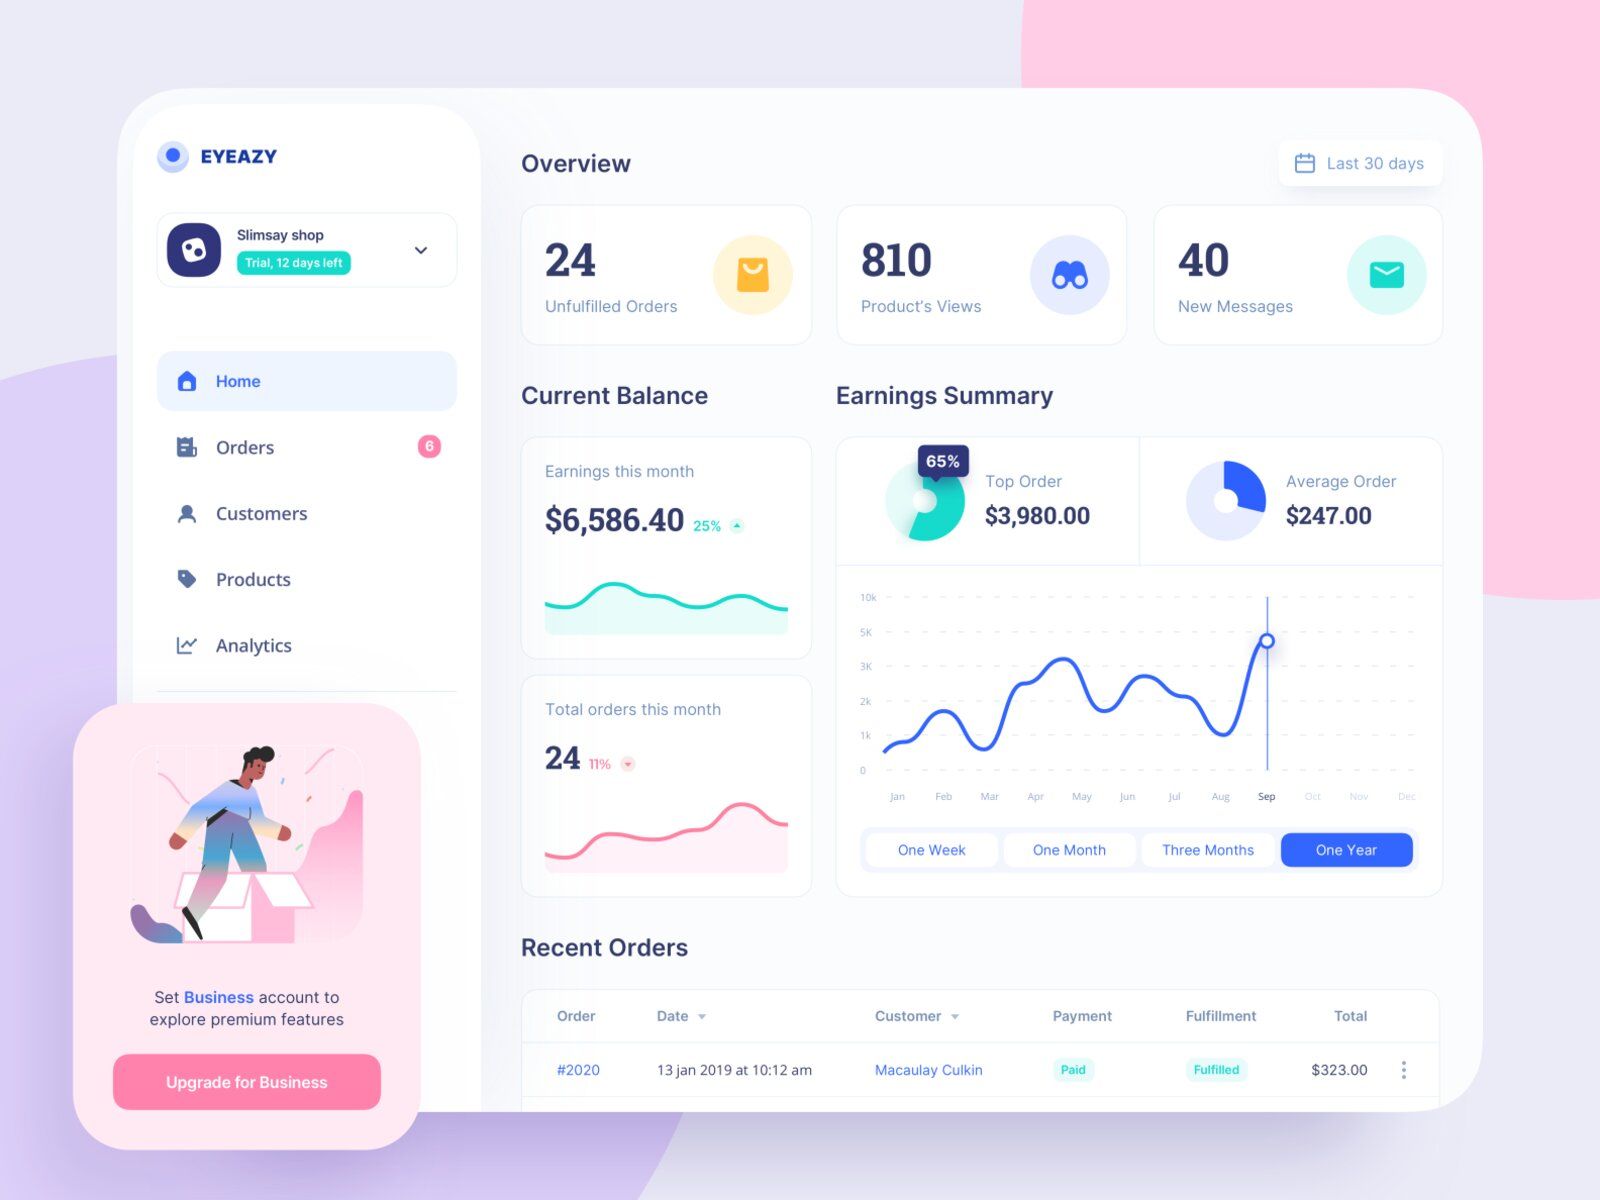 To build a marketplace website, such a Home Screen is a great example of what it can look like (*image by [UGEM](https://dribbble.com/ugem){ rel="nofollow" target="_blank" .default-md}*)